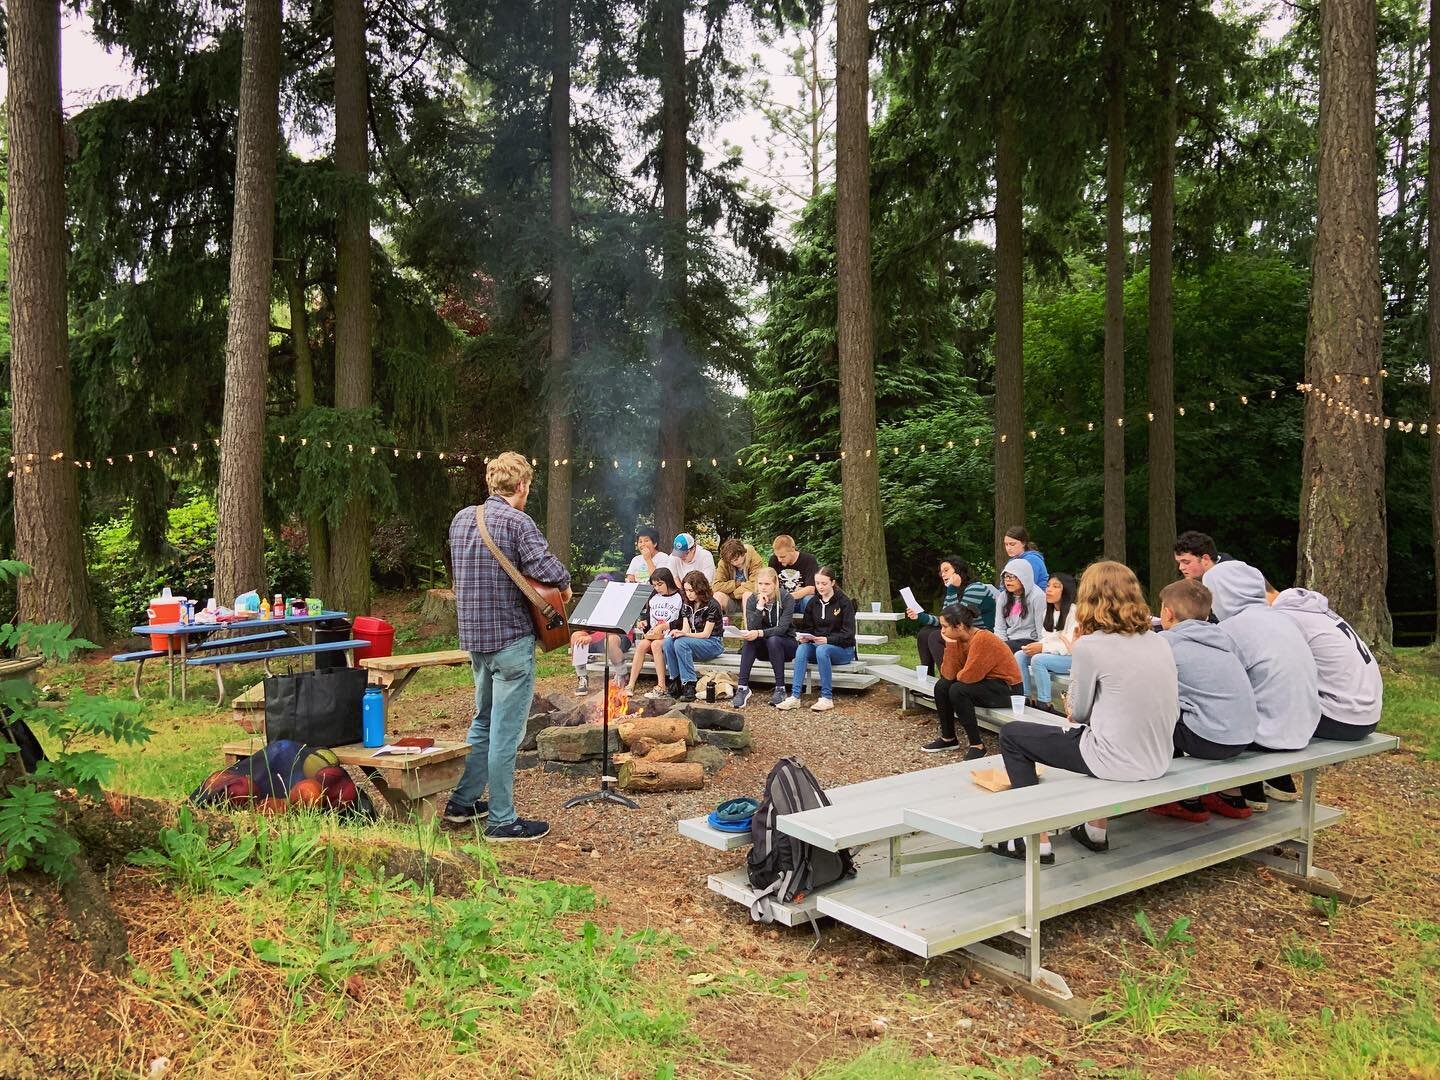 Fireside is back at Wabash for summer! Join us Tuesday nights from 6:30-8:30 pm to roast s&rsquo;mores, play games, sing around the campfire, read the Word, and grow in faith &amp; fellowship!